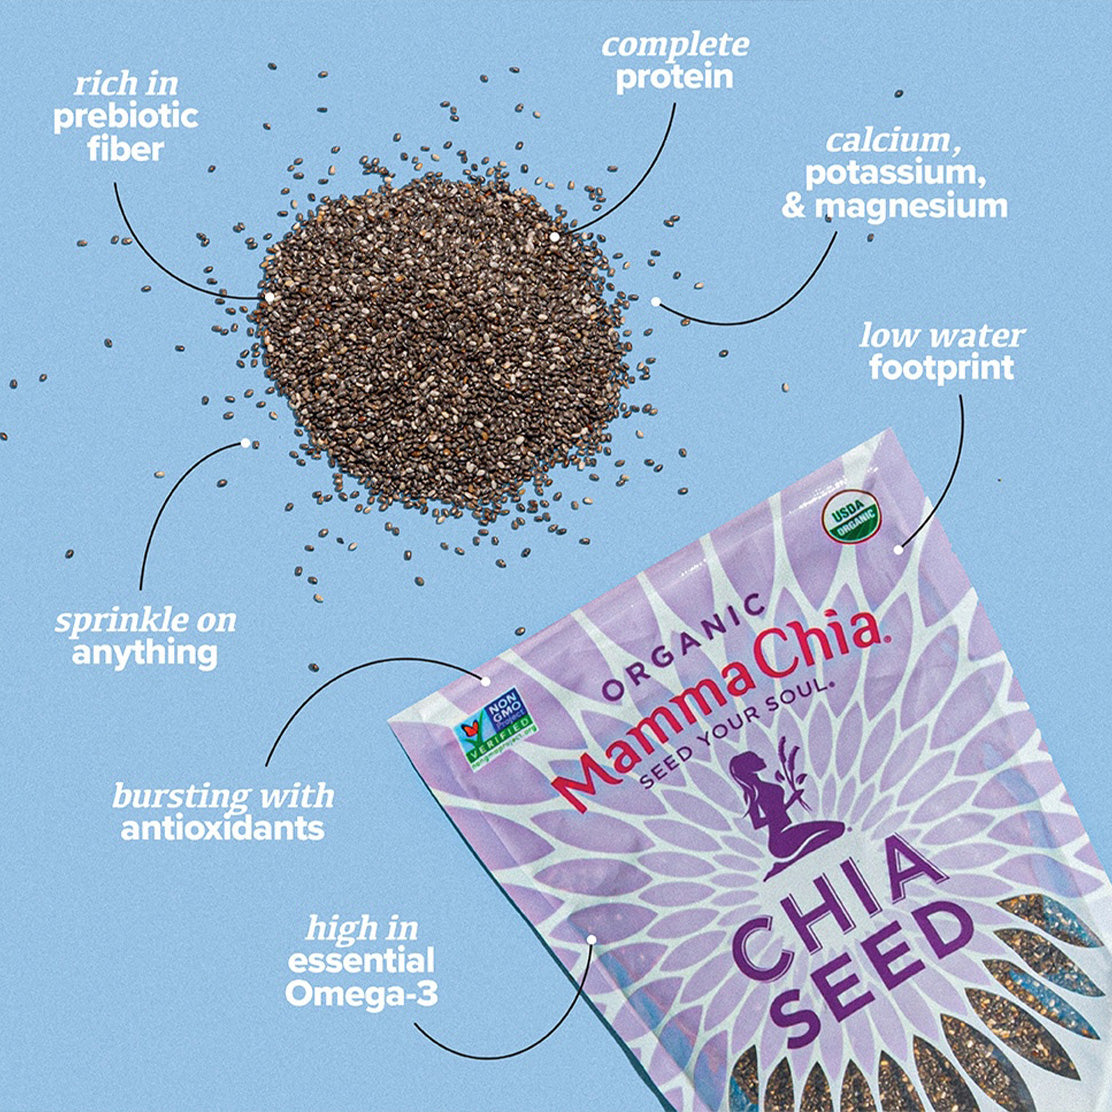 March 23rd is National Chia Day!